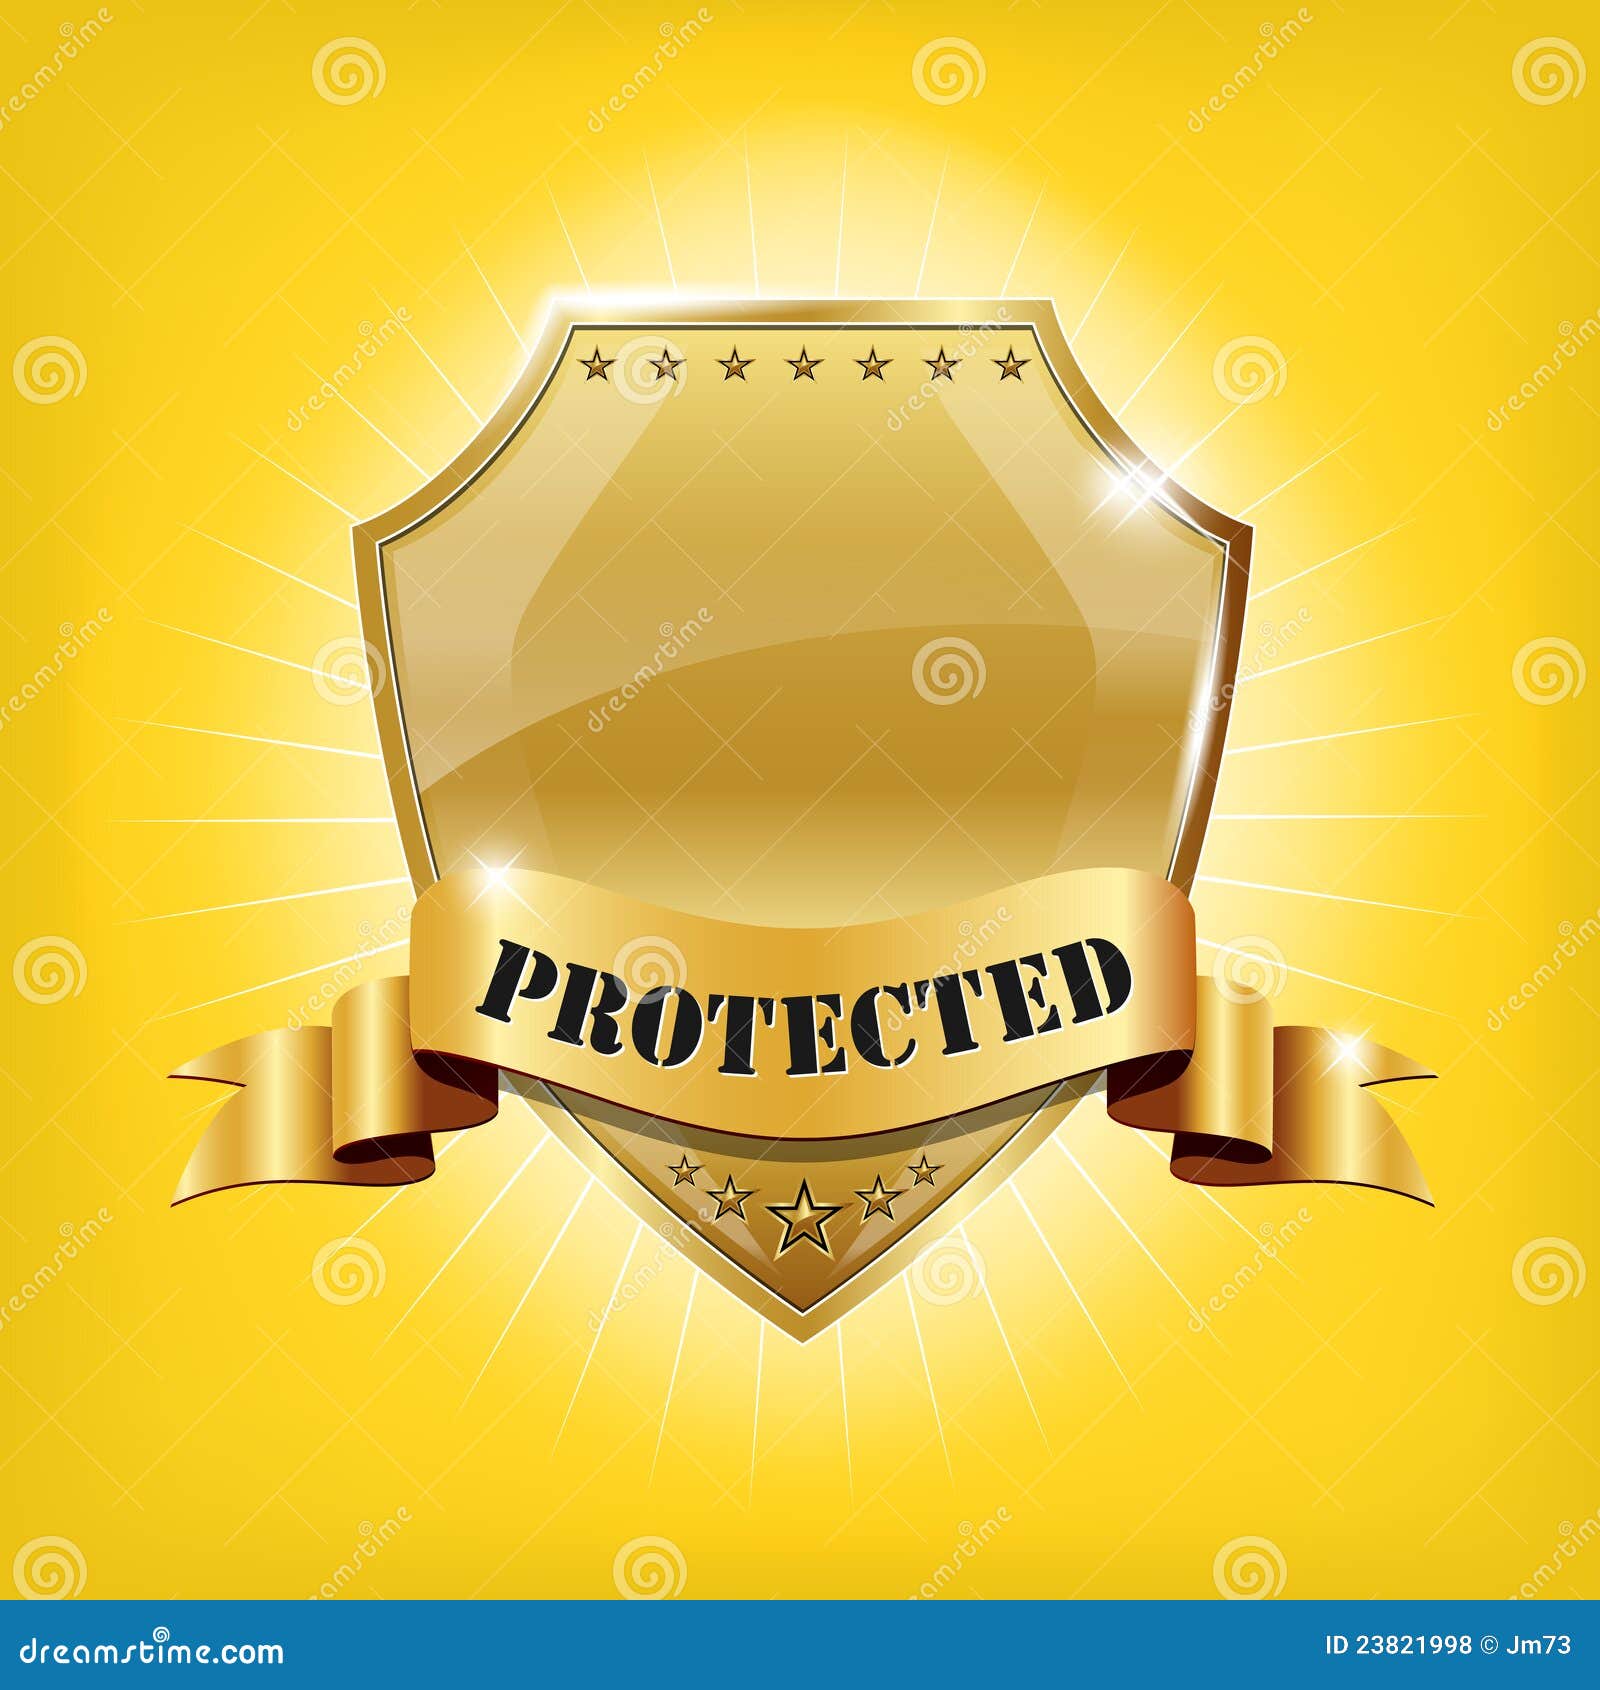 glossy security golden shield - protected